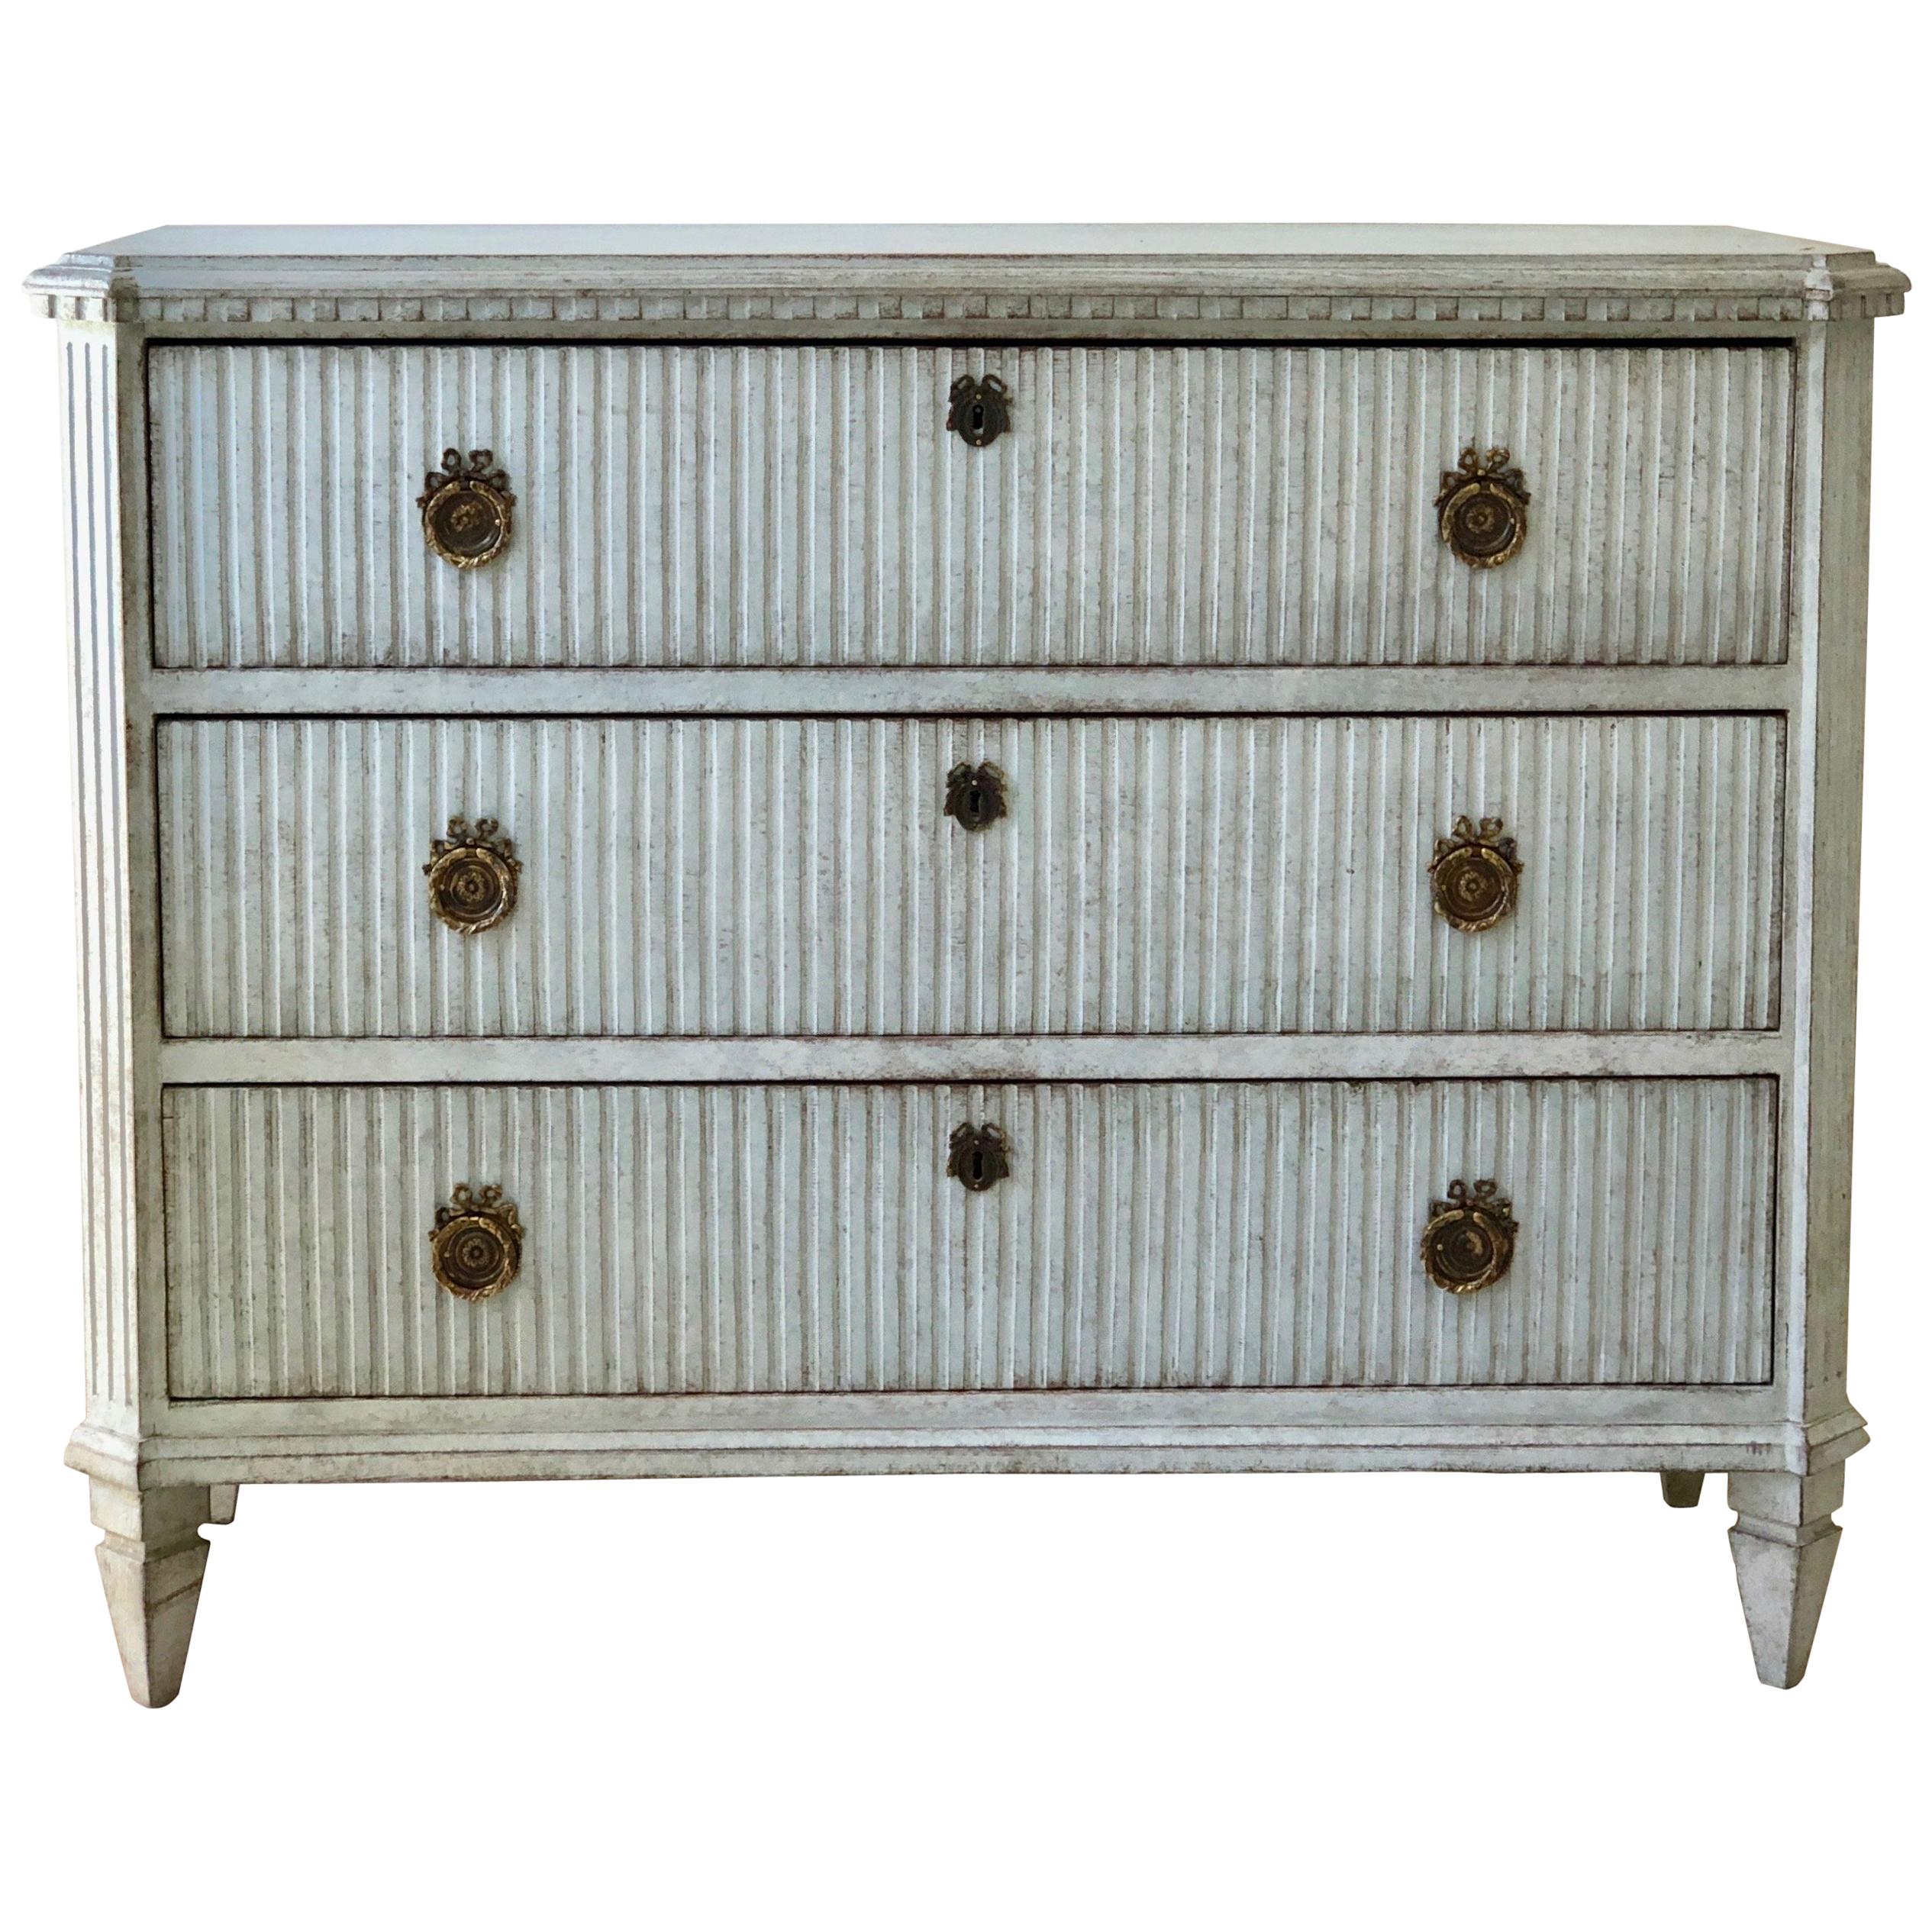 Swedish Gustavian Chest of Drawers with Reeded Front